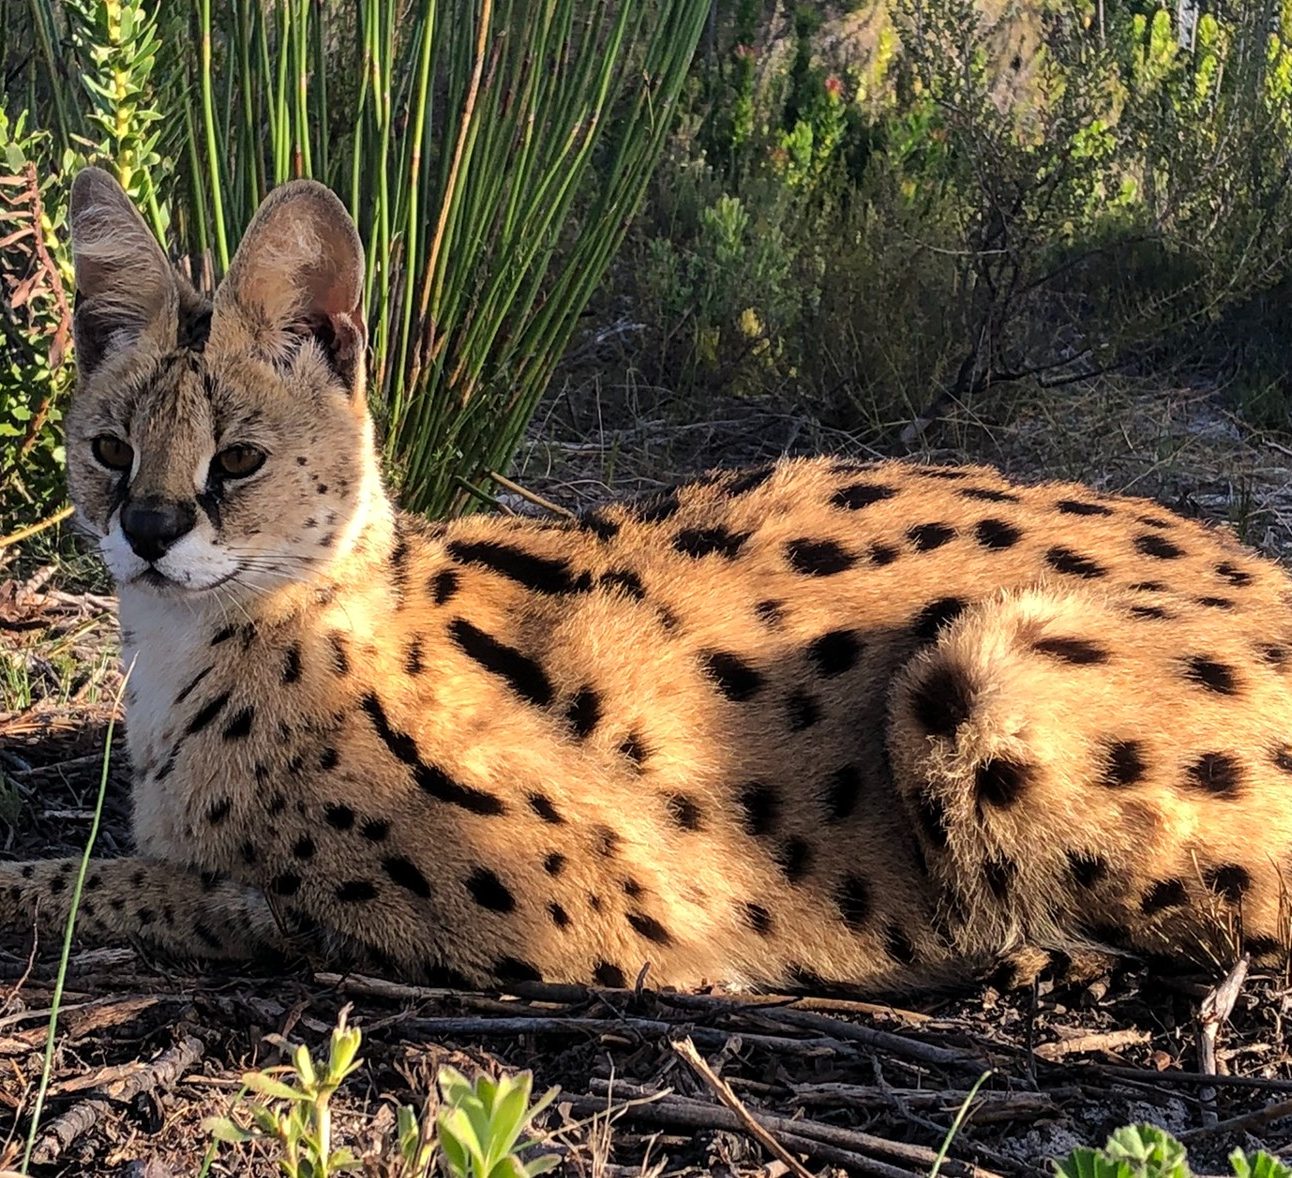 An adult serval lying down relaxing amongst long grass and vegetation